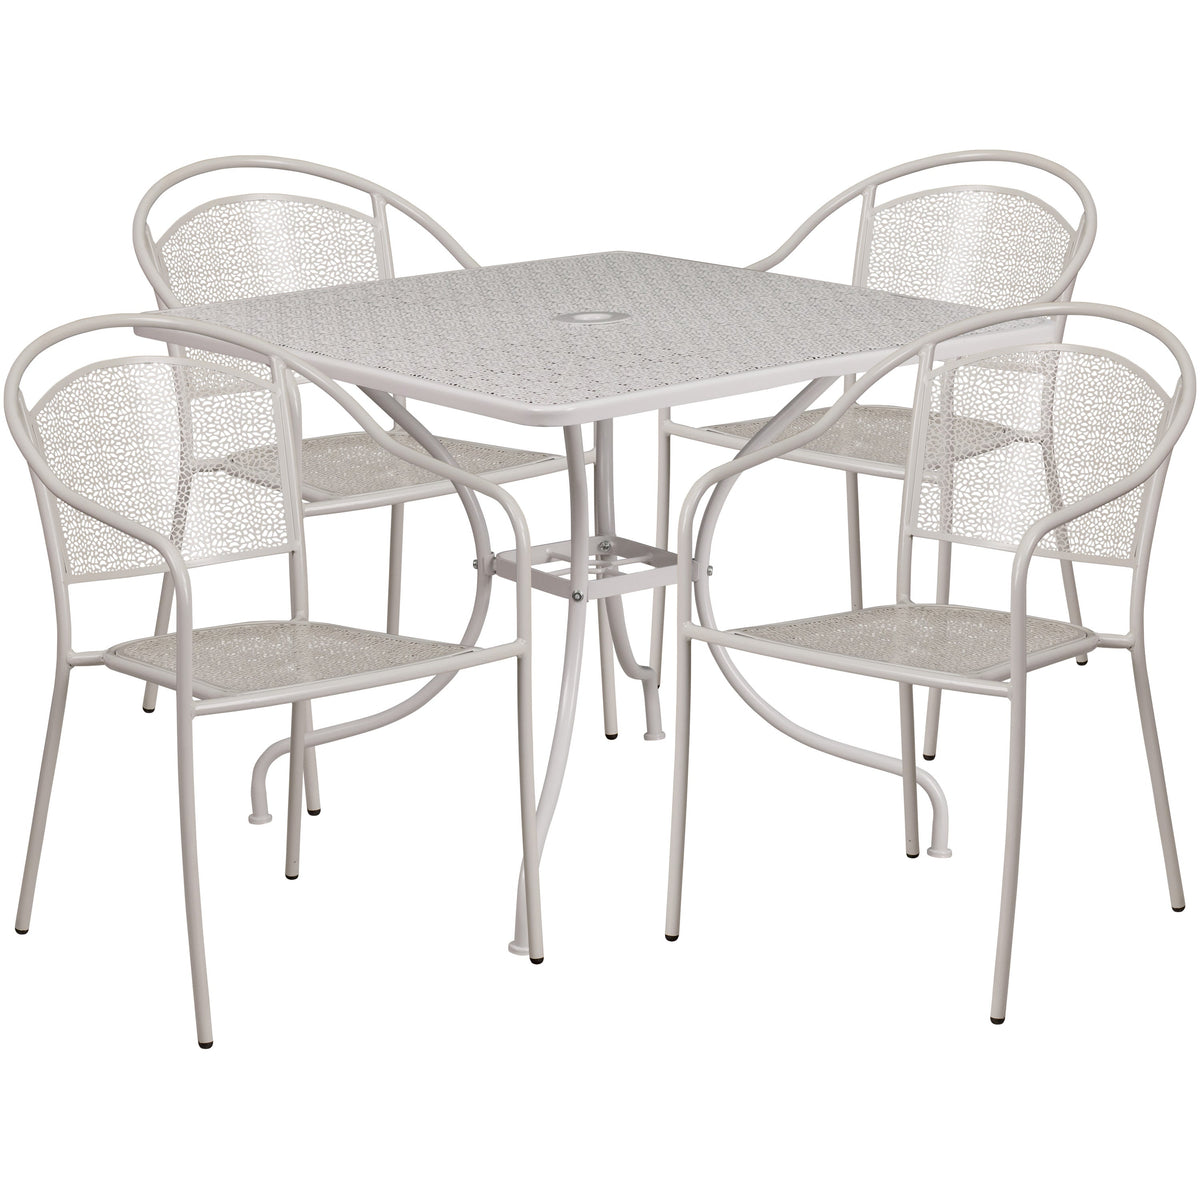 Light Gray |#| 35.5inch Square Lt Gray Indoor-Outdoor Steel Patio Table Set w/ 4 Round Back Chairs